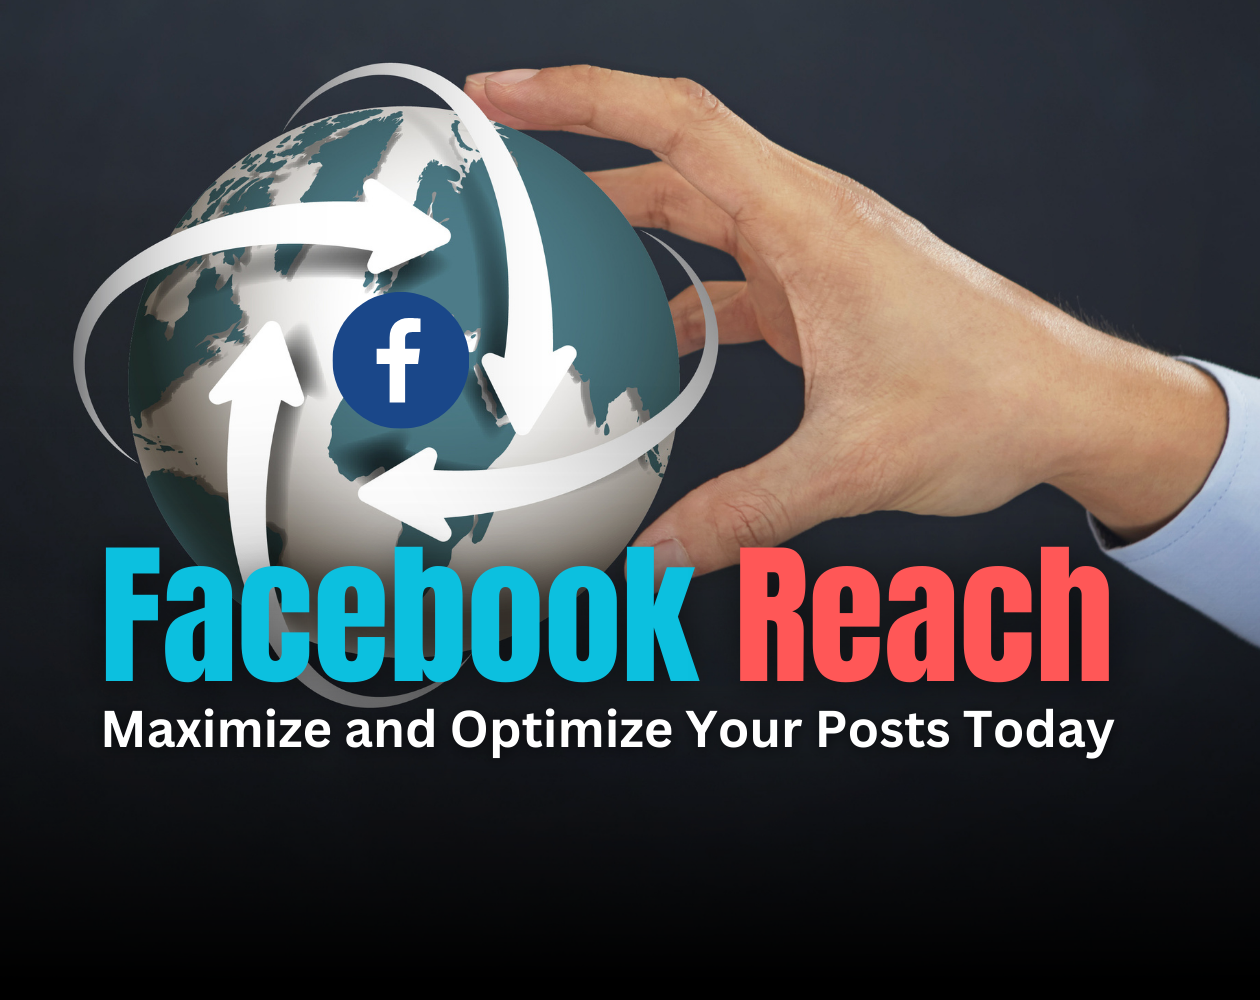 Facebook Reach: Maximize and Optimize Your Posts Today